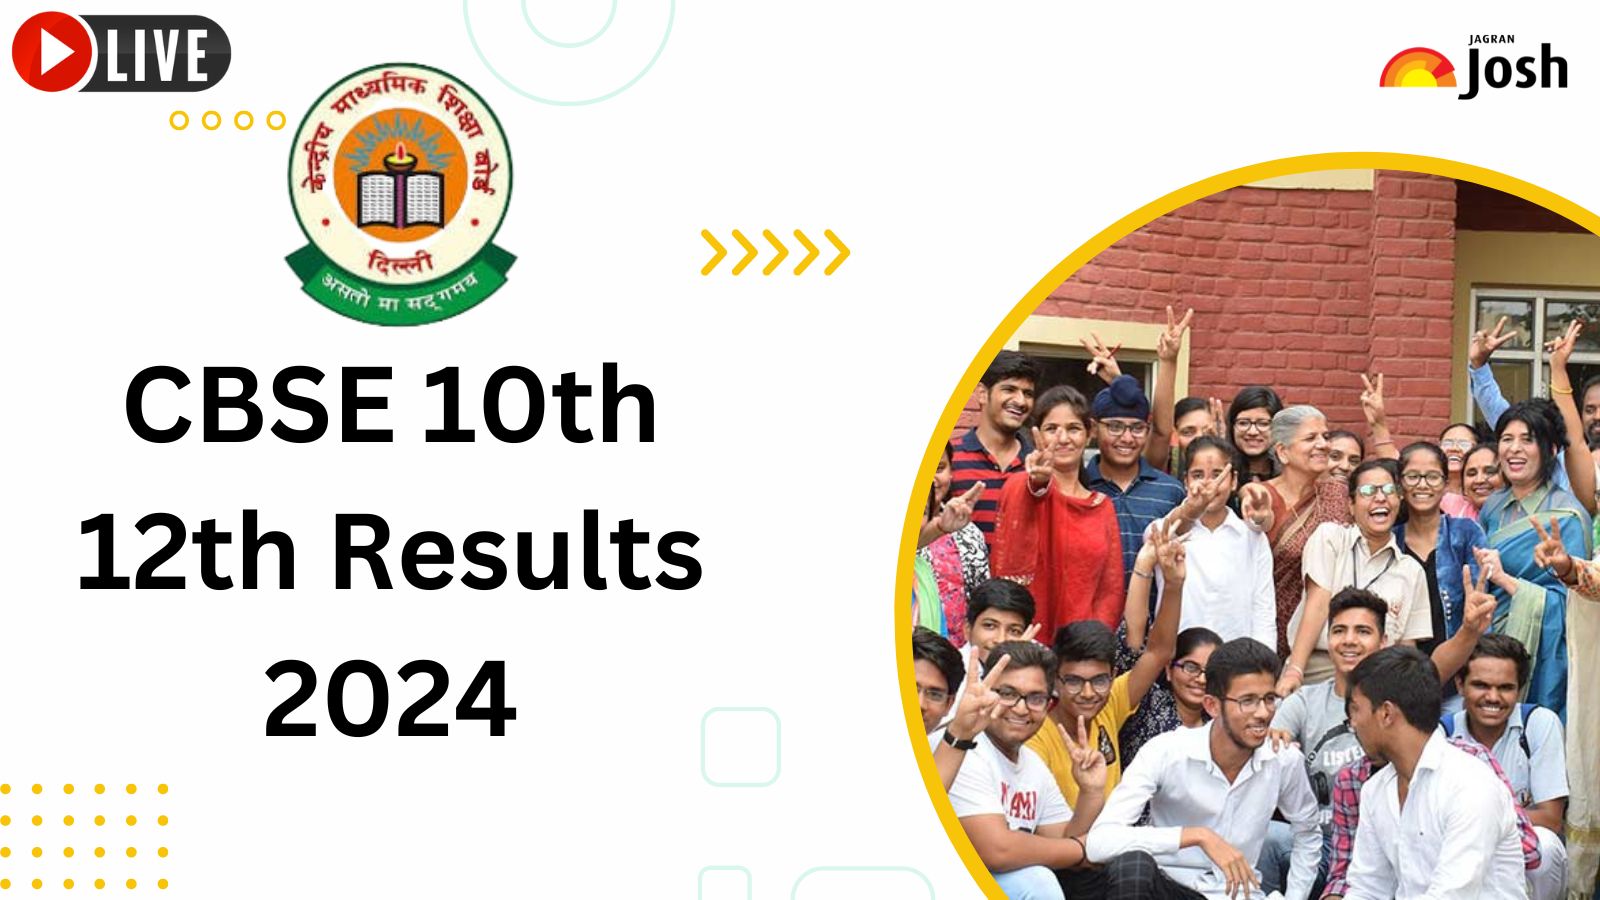 CBSE Board Result 2024 Class 10 Declared LIVE: Check Official Link: cbseresults.nic.in, CBSE Board 10th Results Announced on Umang and Digilocker Apps by Roll Number, Date of Birth